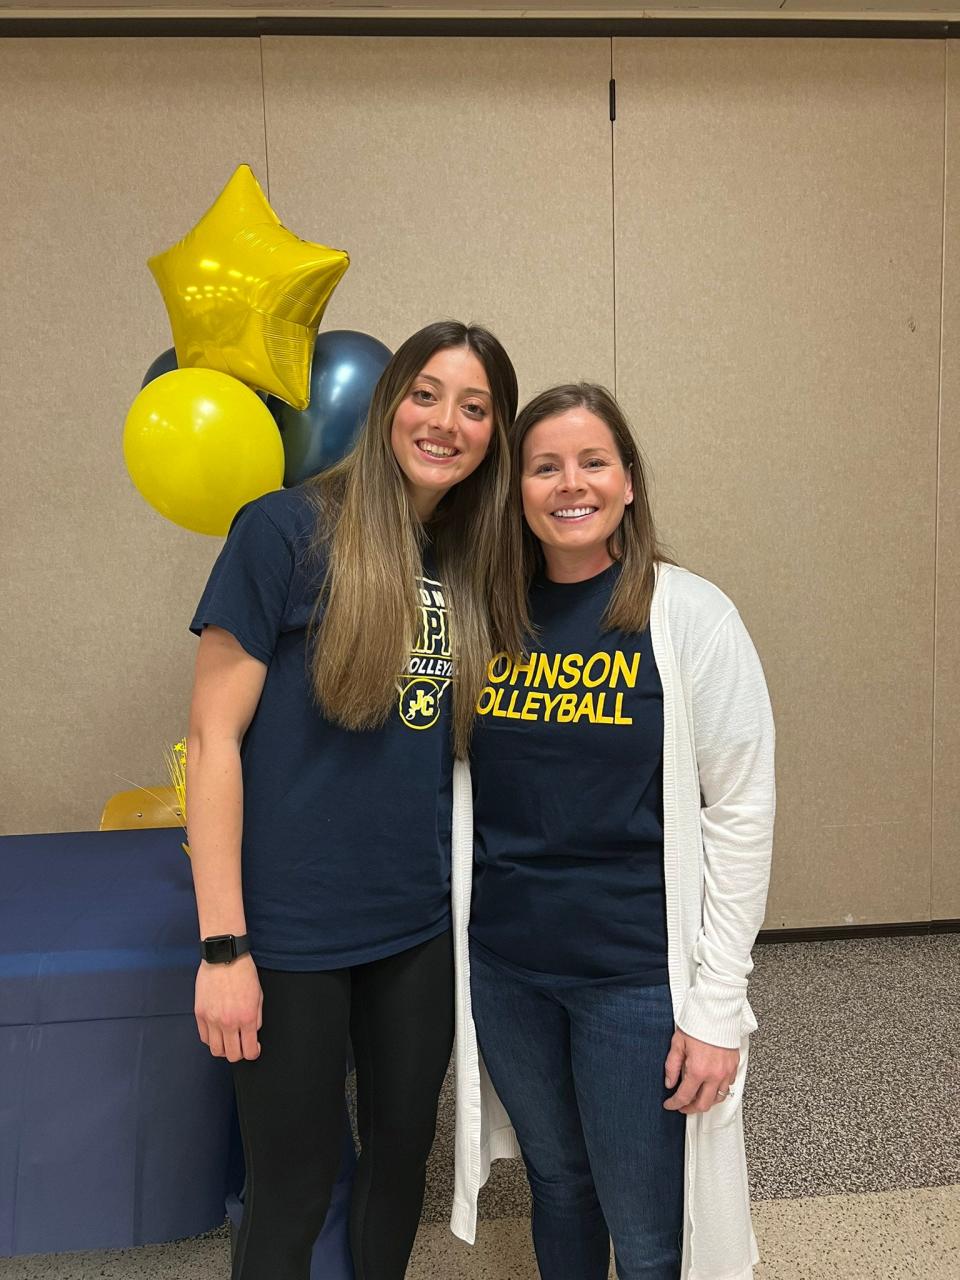 Camilla Ossola, left, said Silver Lake volleyball coach Sarah Johnson helped her during the college recruiting process. Ossola will play for Johnson County Community College.